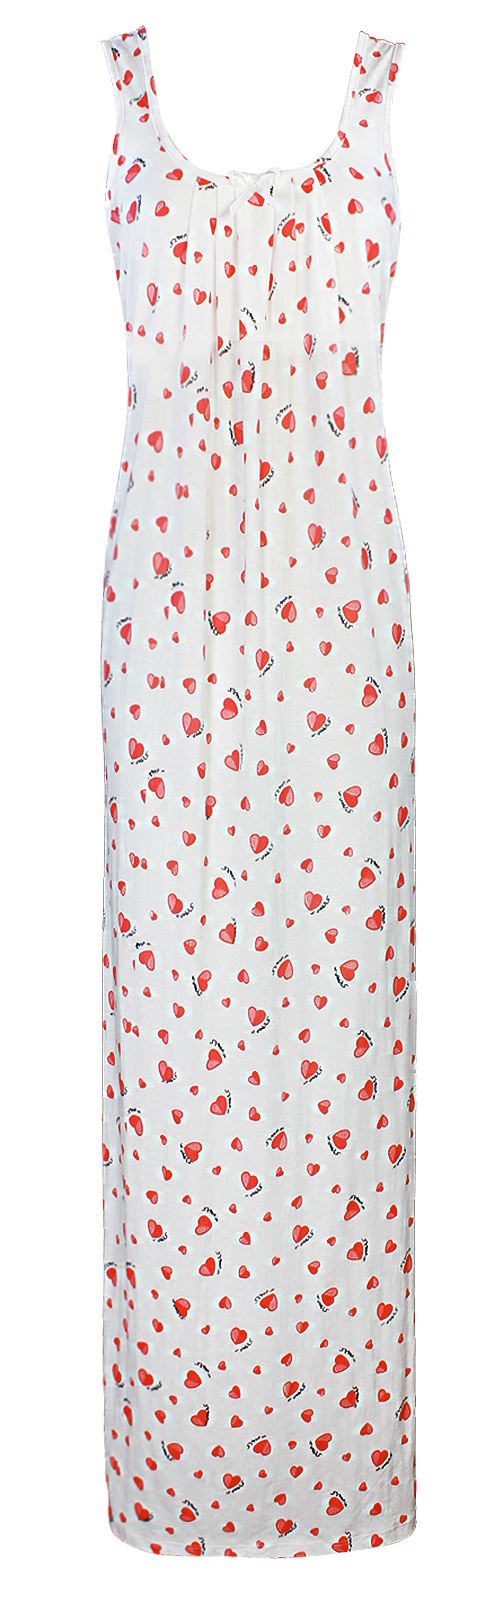 Coral / One Size Cotton Nighty Slip Heart Print / Plain Night Gown Free Size The Orange Tags